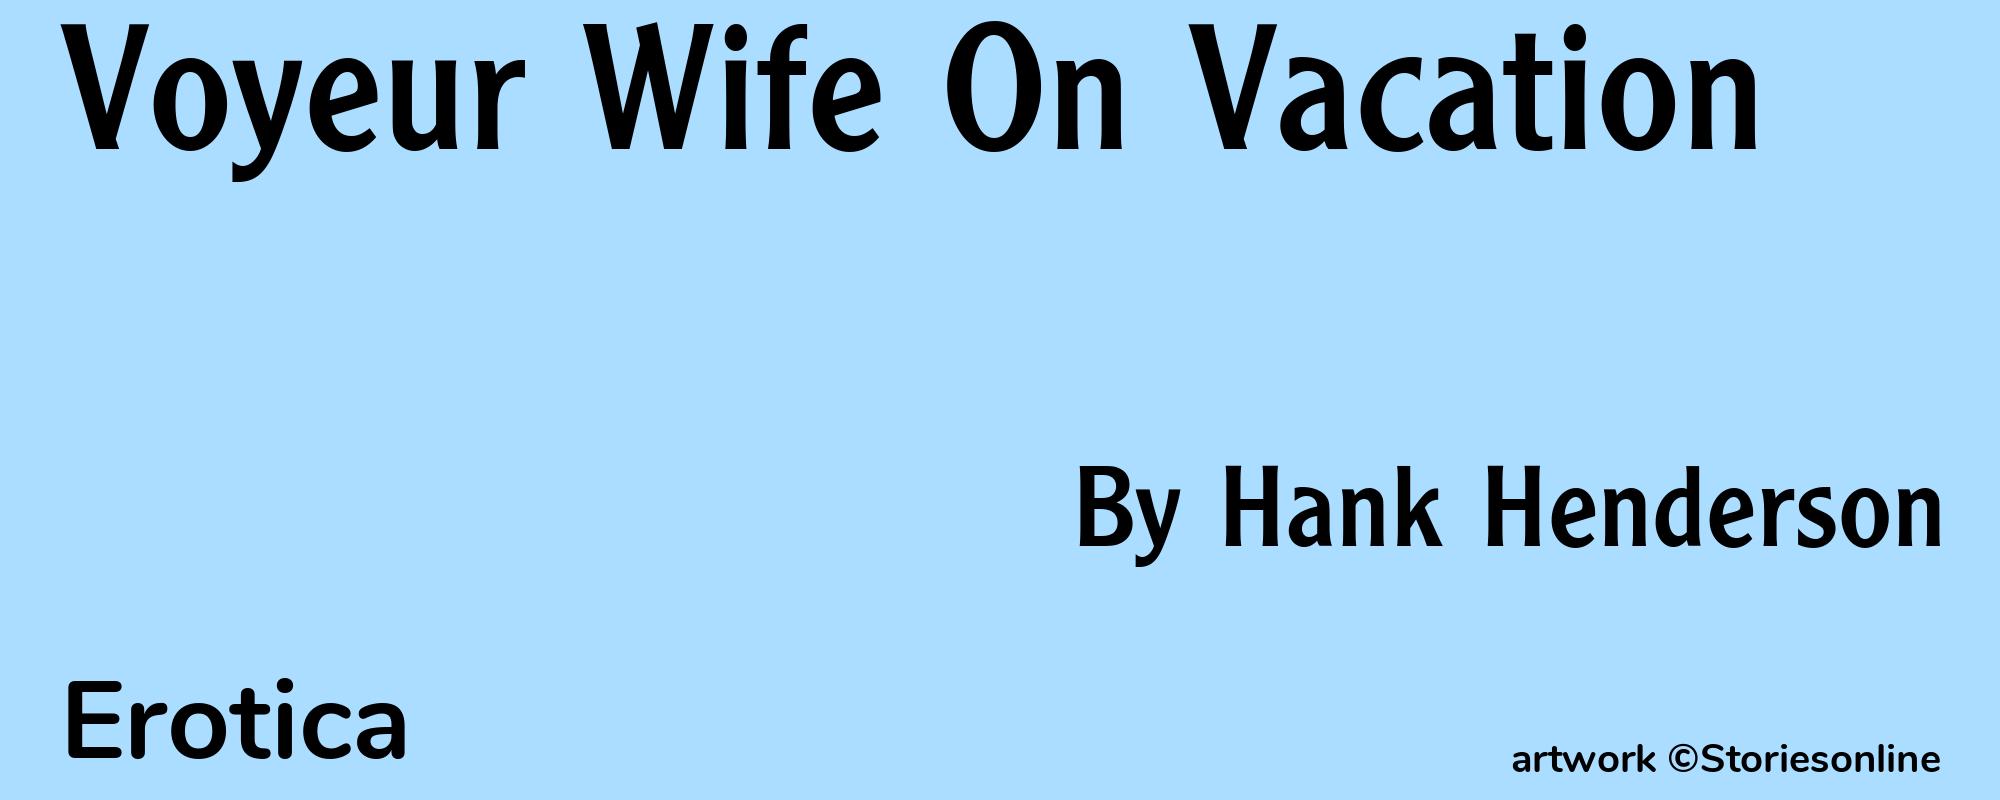 Voyeur Wife On Vacation - Cover